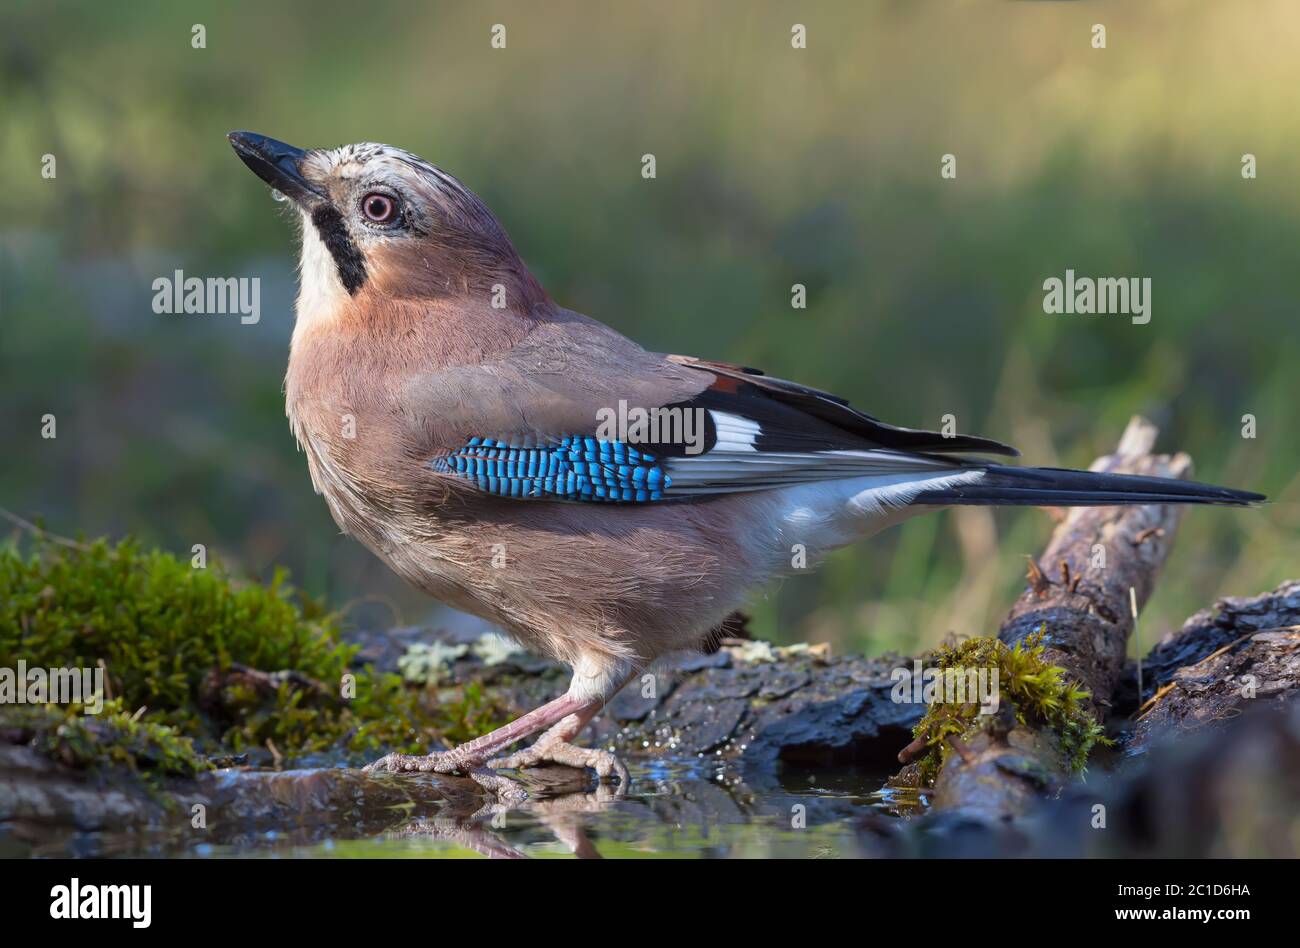 Graceful Eurasian Jay (garrulus glandarius) turns her back on a lichen and mossy trunk in the forest near water pond Stock Photo